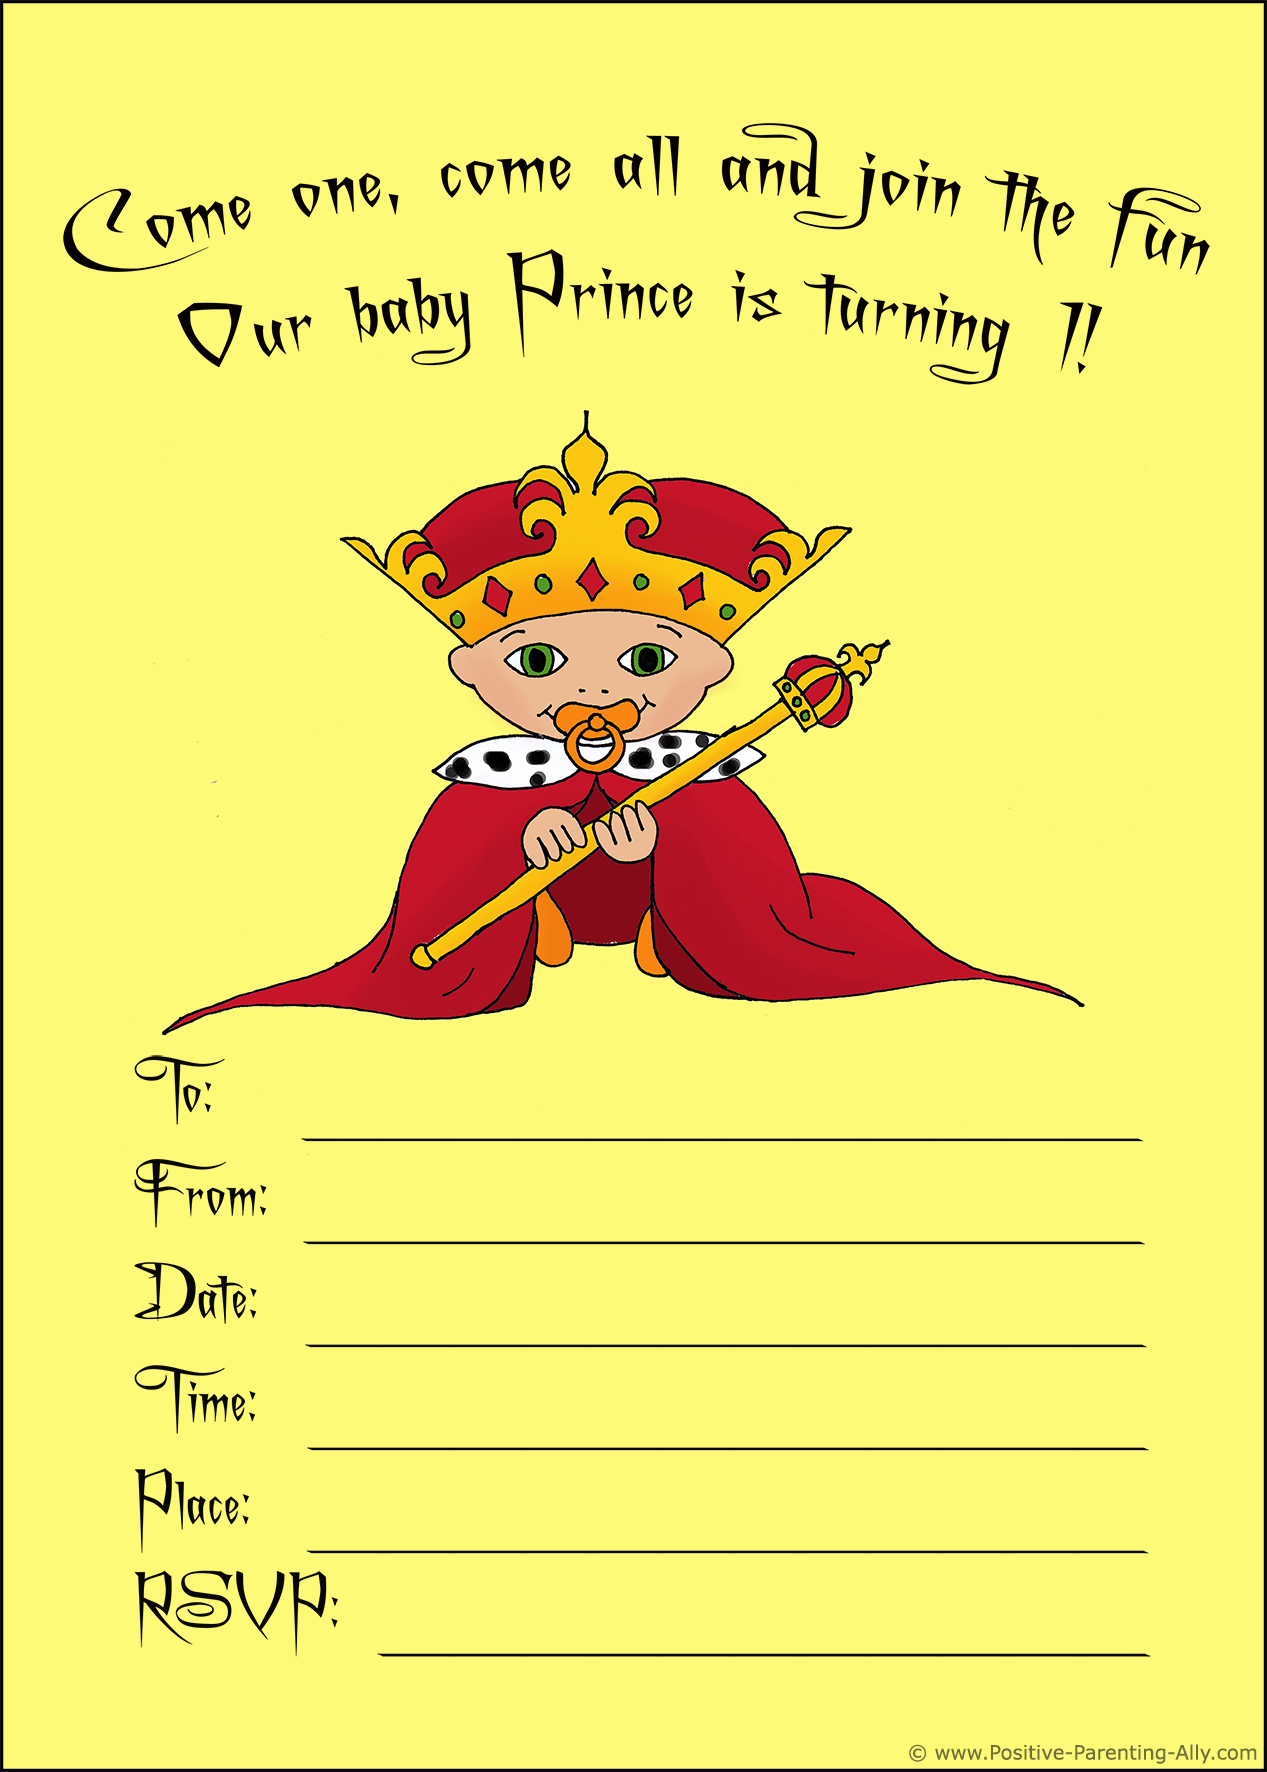 Printable birthday invitation with a baby prince in king's costume.